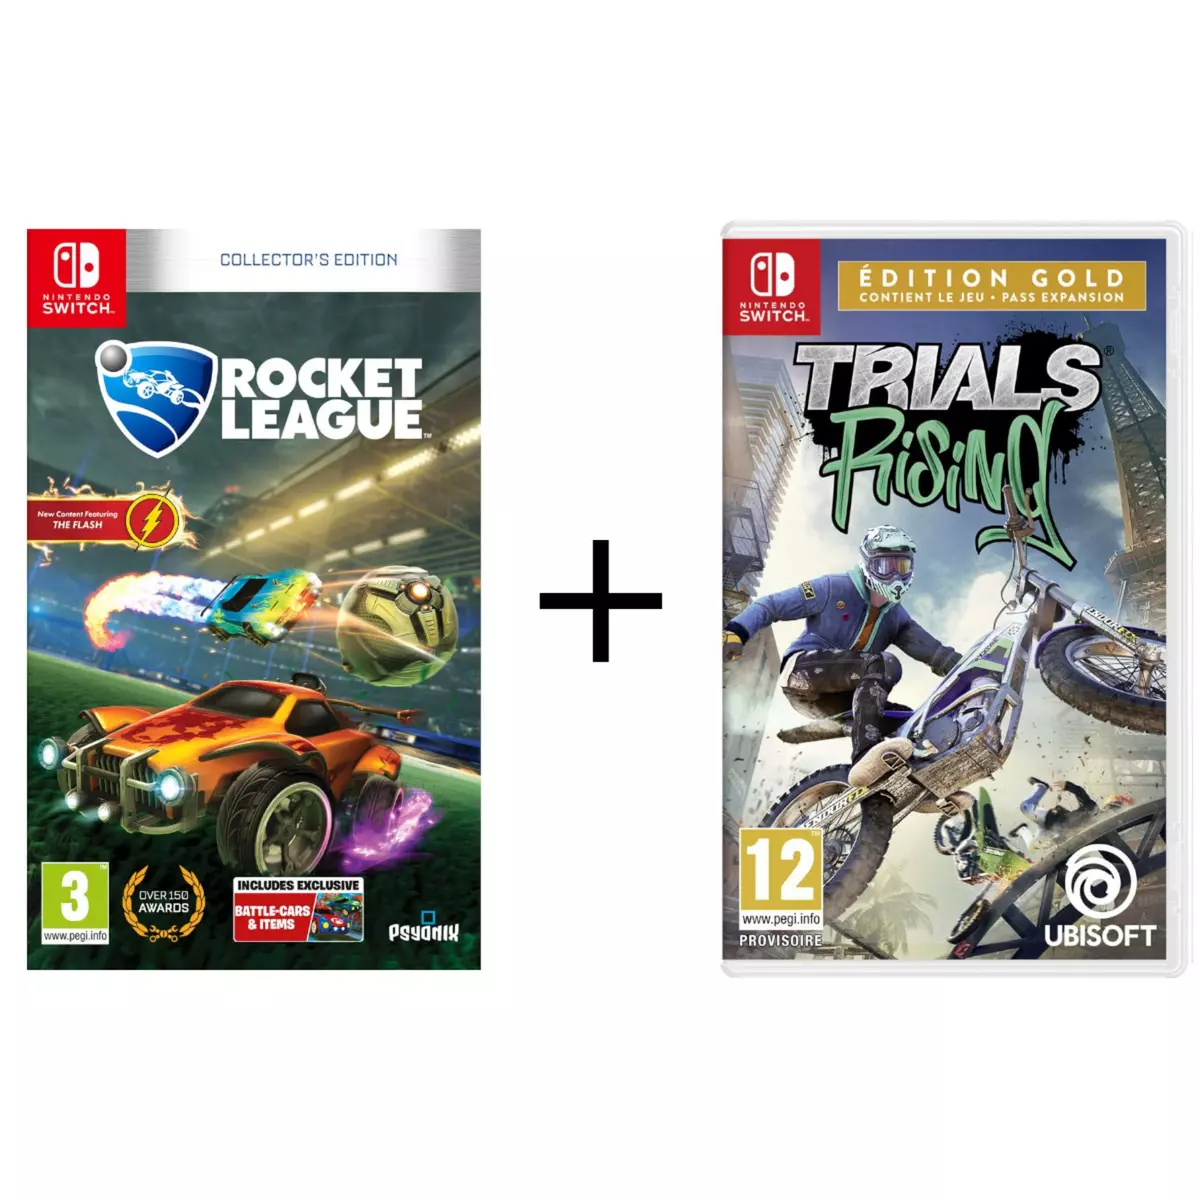 EXCLU WEB Rocket League Collector's Edition Nintendo Switch + Trials Rising Edition Gold Nintendo Switch